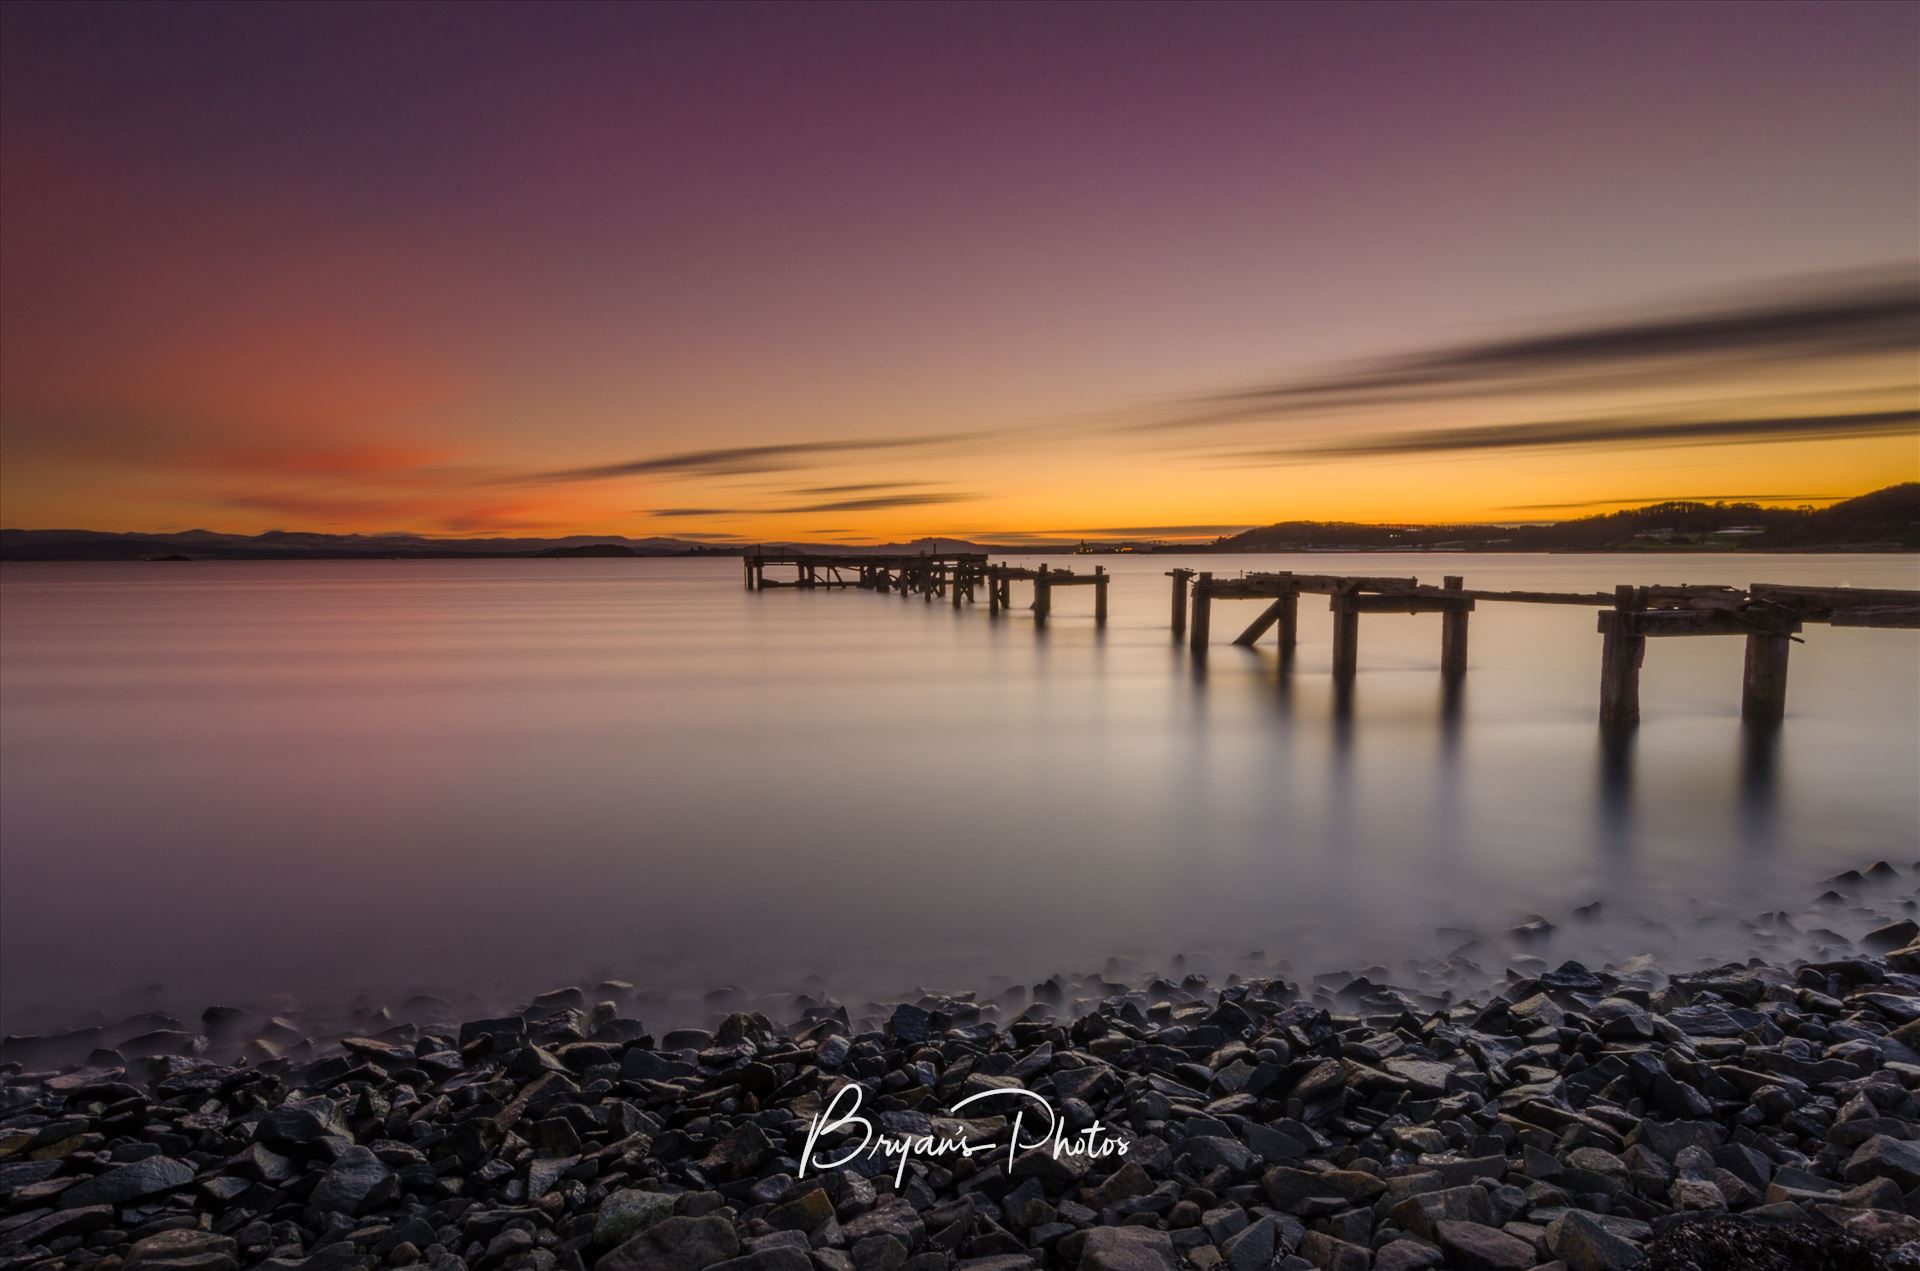 Sunset at Aberdour A photograph of the Abandoned pier at Aberdour on the Fife coast taken as the sun sets. by Bryans Photos